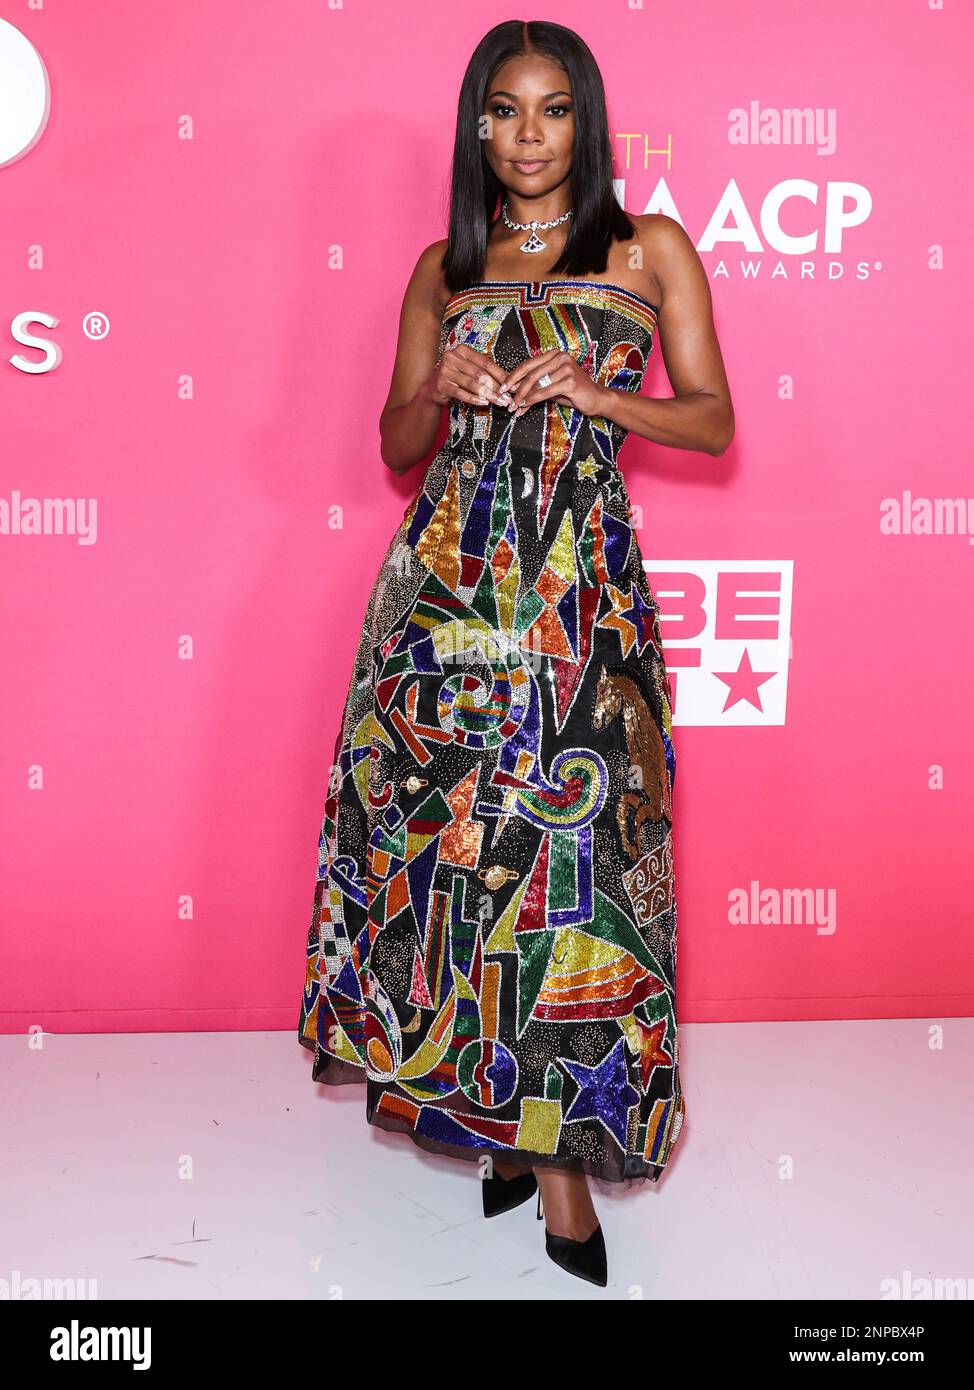 Pasadena, United States. 25th Feb, 2023. PASADENA, LOS ANGELES, CALIFORNIA, USA - FEBRUARY 25: American actress Gabrielle Union, recipient of the President's Award wearing Atelier Versace SS98 Couture poses in the press room at the 54th Annual NAACP Image Awards held at the Pasadena Civic Auditorium on February 25, 2023 in Pasadena, Los Angeles, California, United States. (Photo by Xavier Collin/Image Press Agency) Credit: Image Press Agency/Alamy Live News Stock Photo